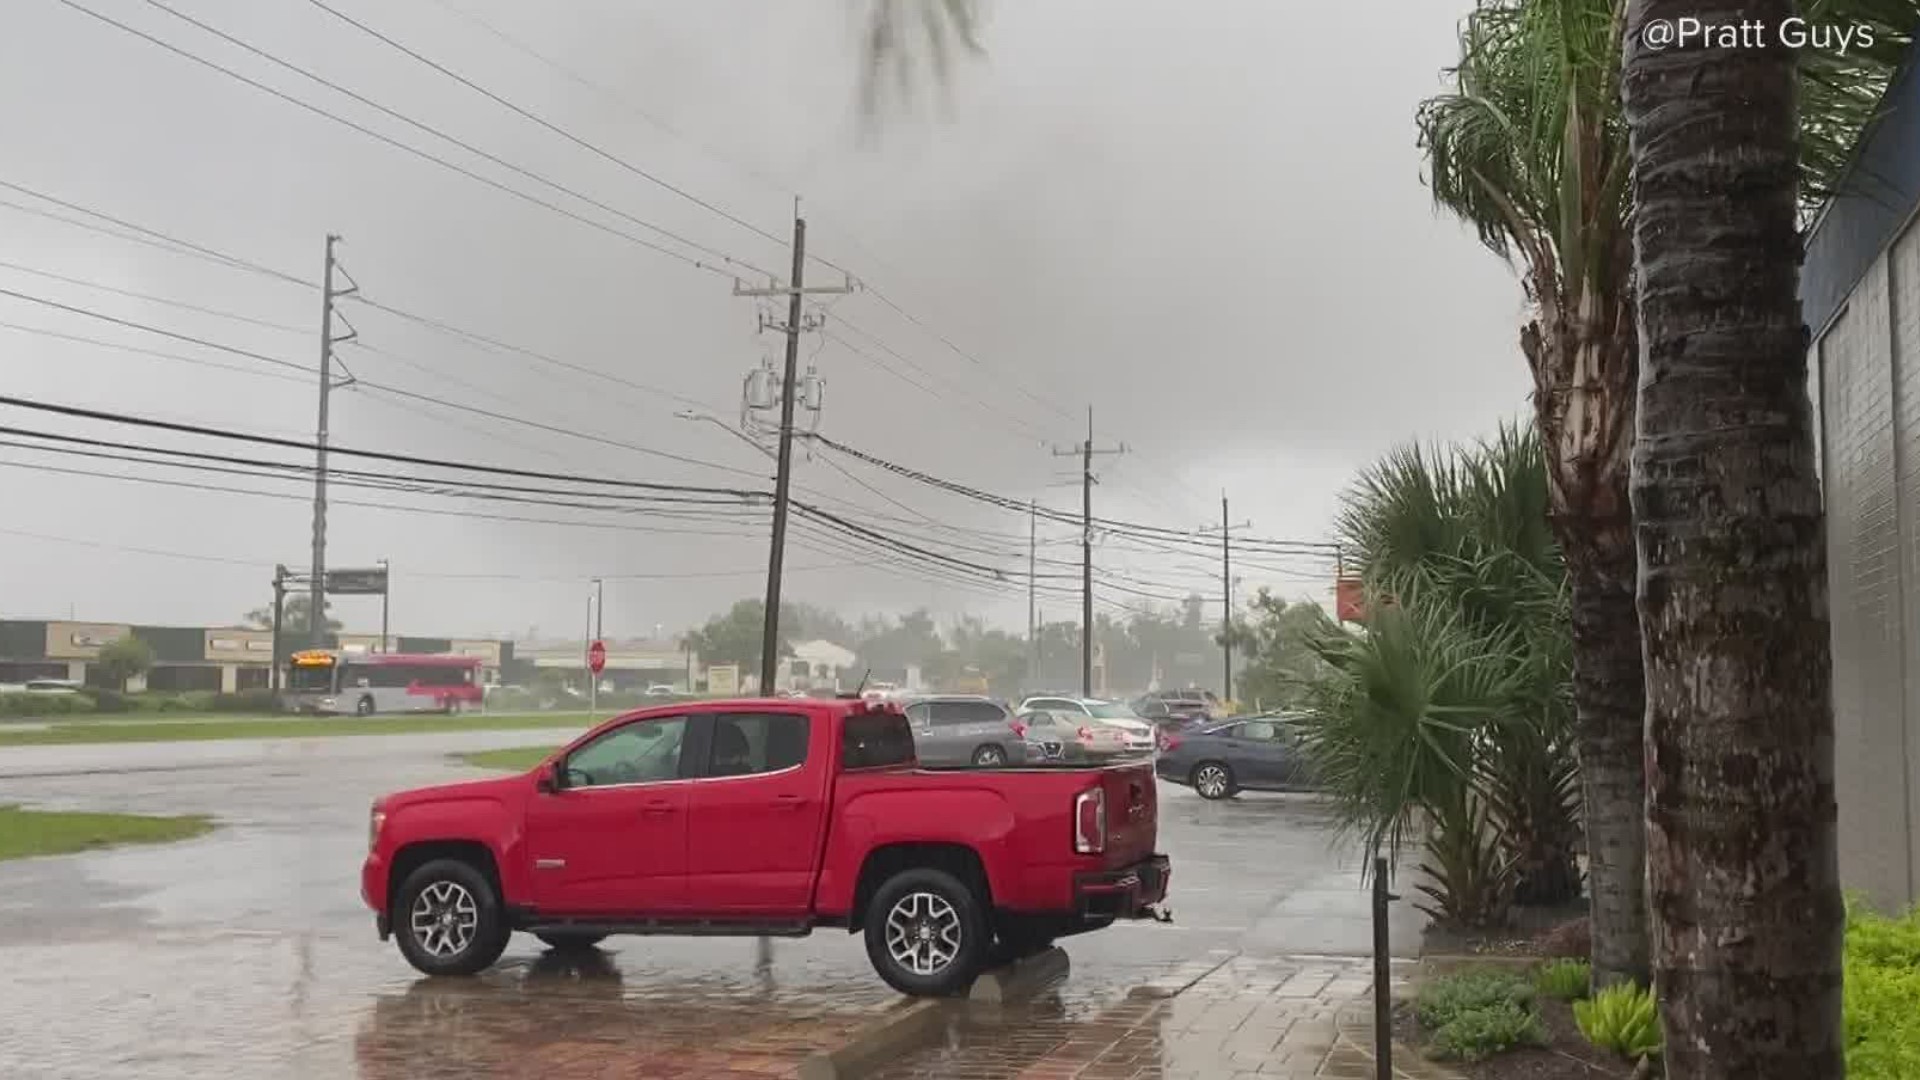 A tornado caused damage in the Baymeadows area that was spun up by Tropical Storm Elsa